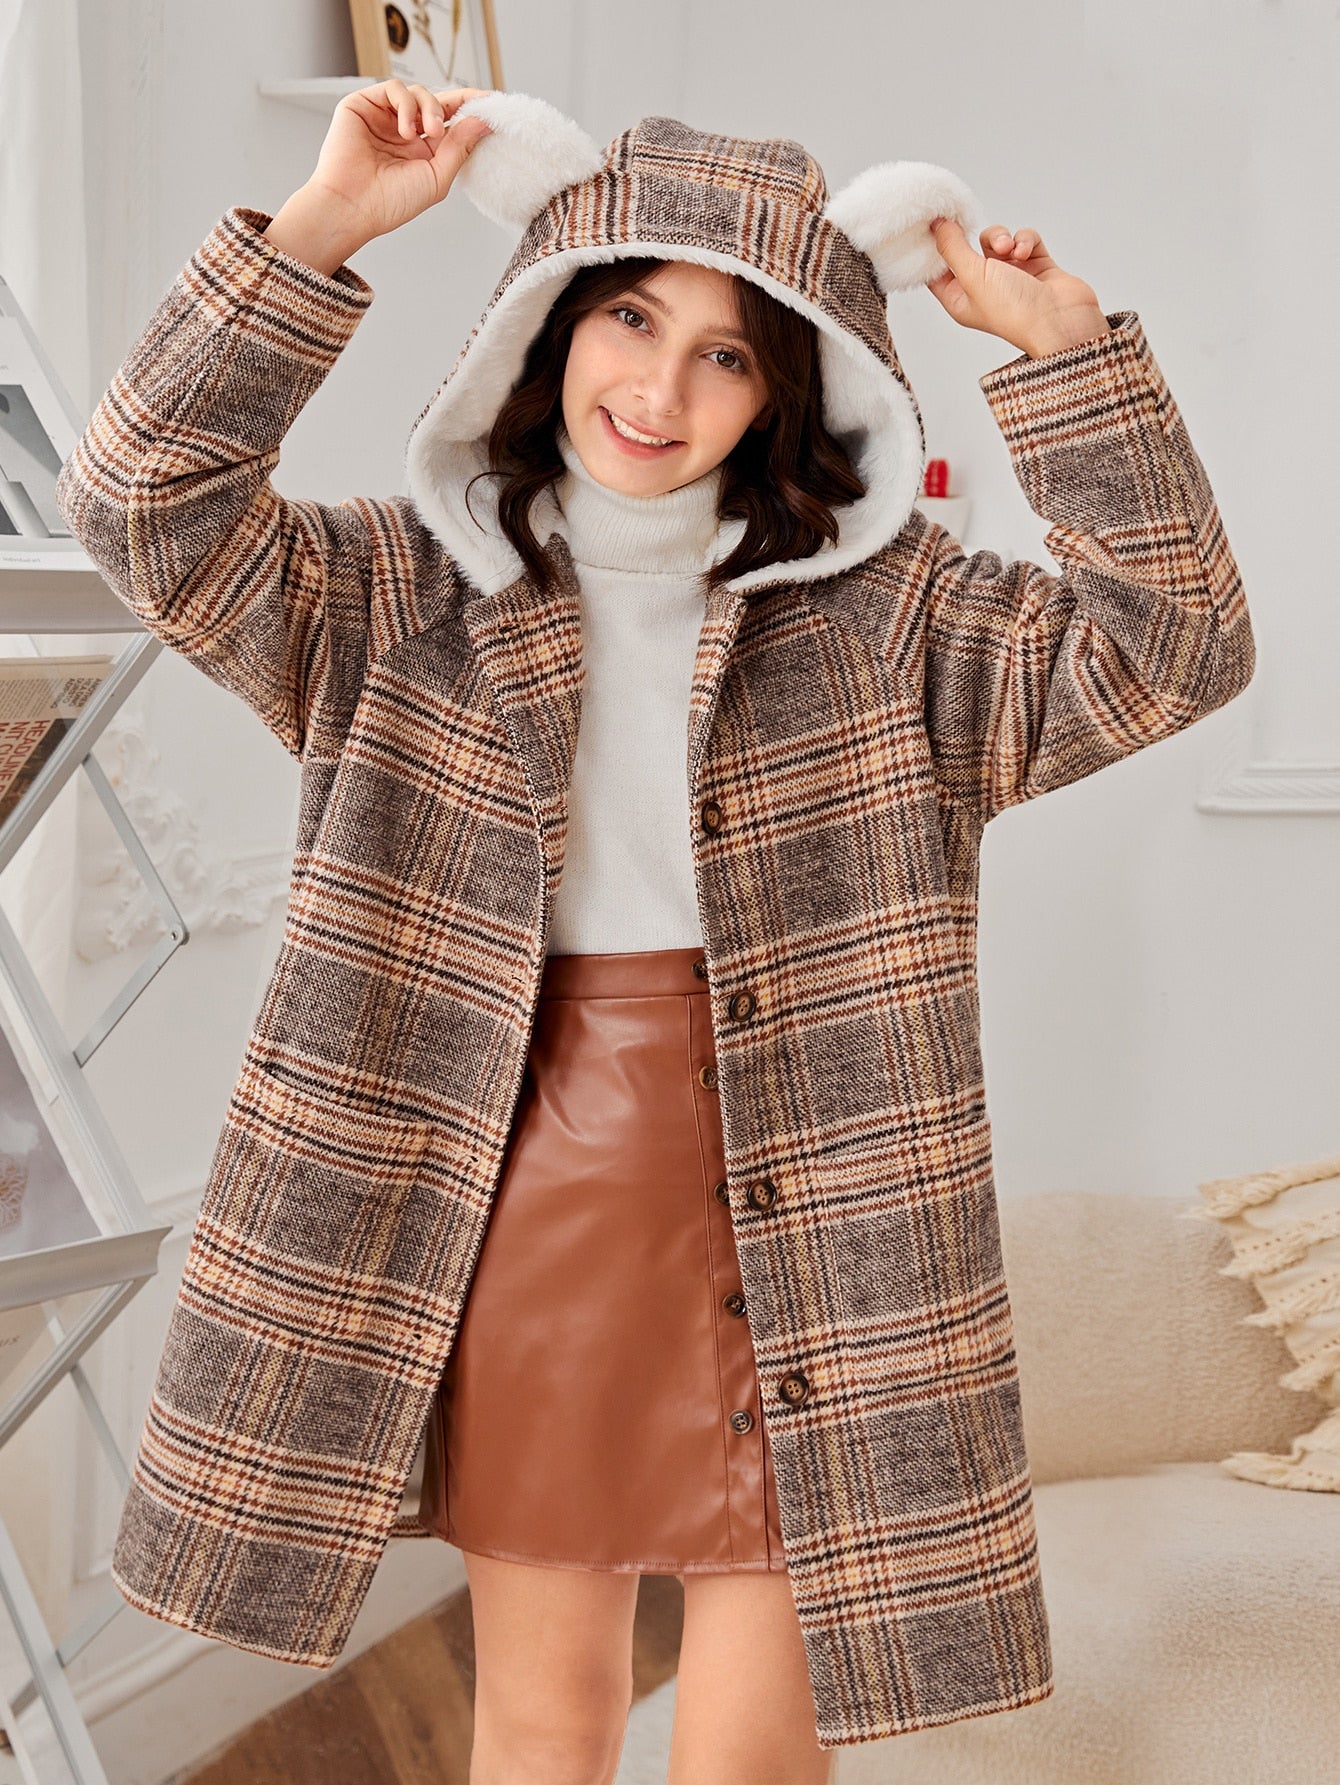 Teen Girls 3D Ear Patched Teddy Lined Plaid Overcoat